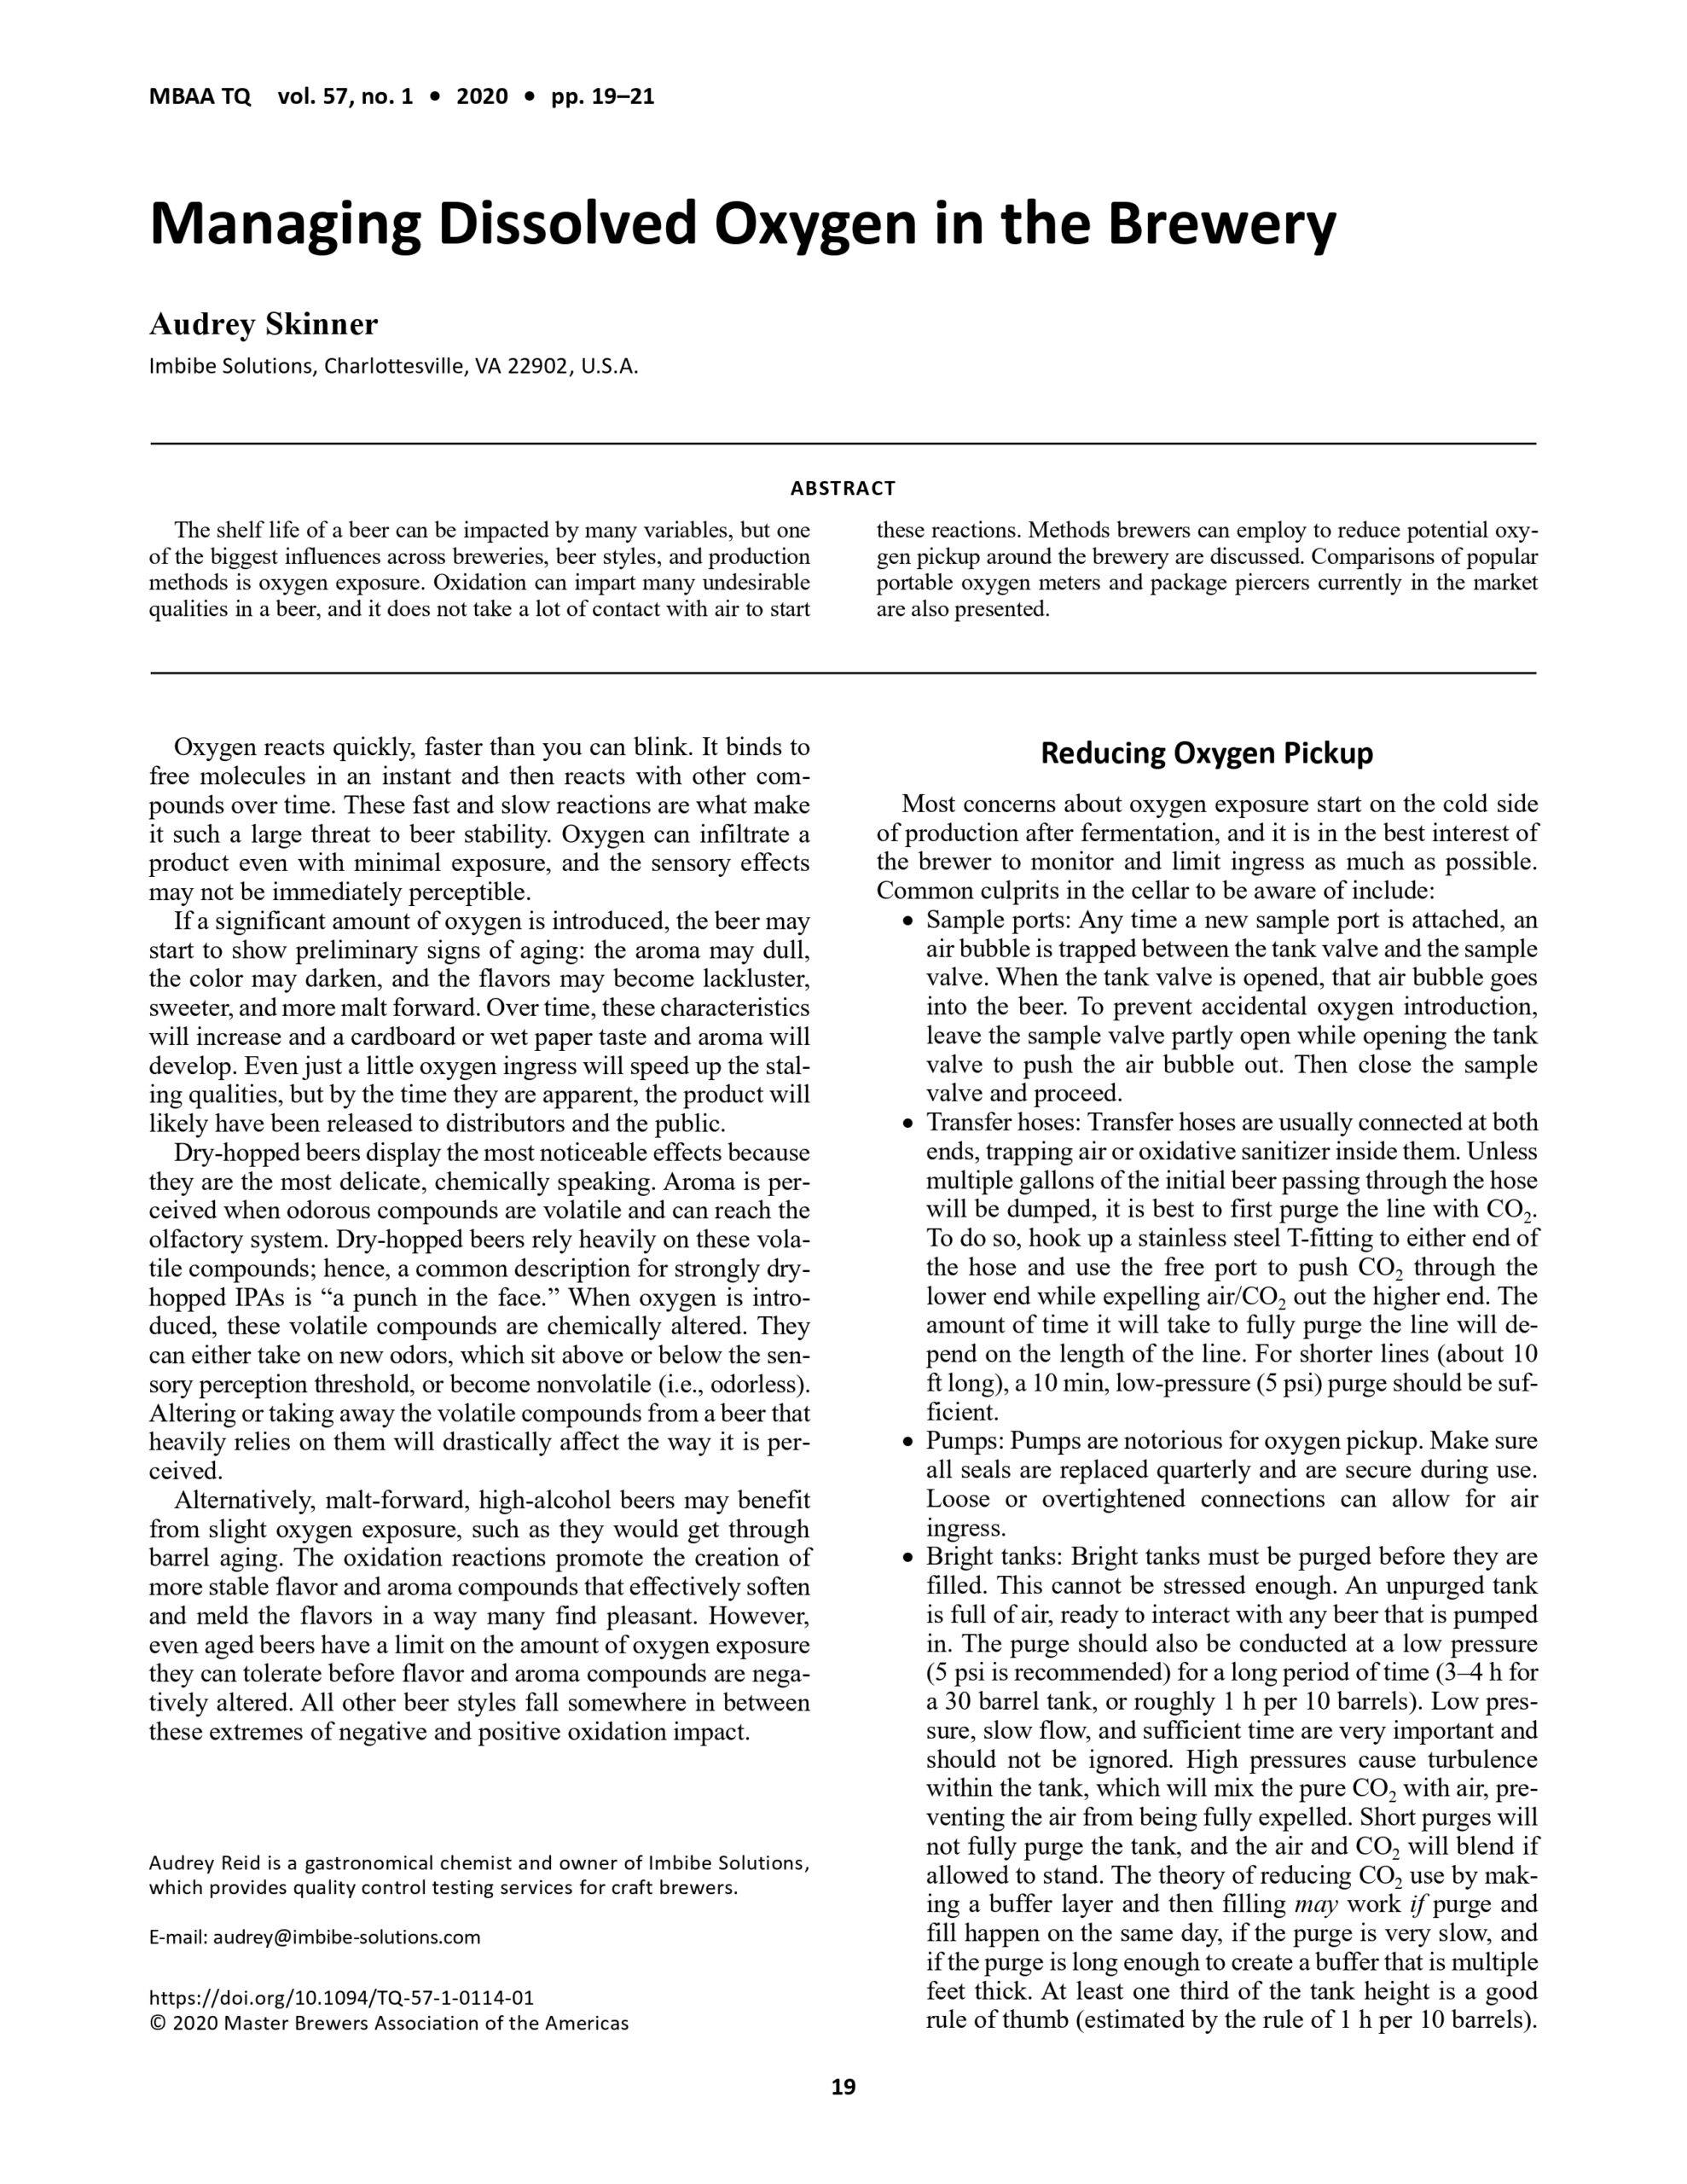 Master Brewers Association of the Americas Technical Quarterly Publication on Managing Dissolved Oxygen in a Brewery, page 1 of 3